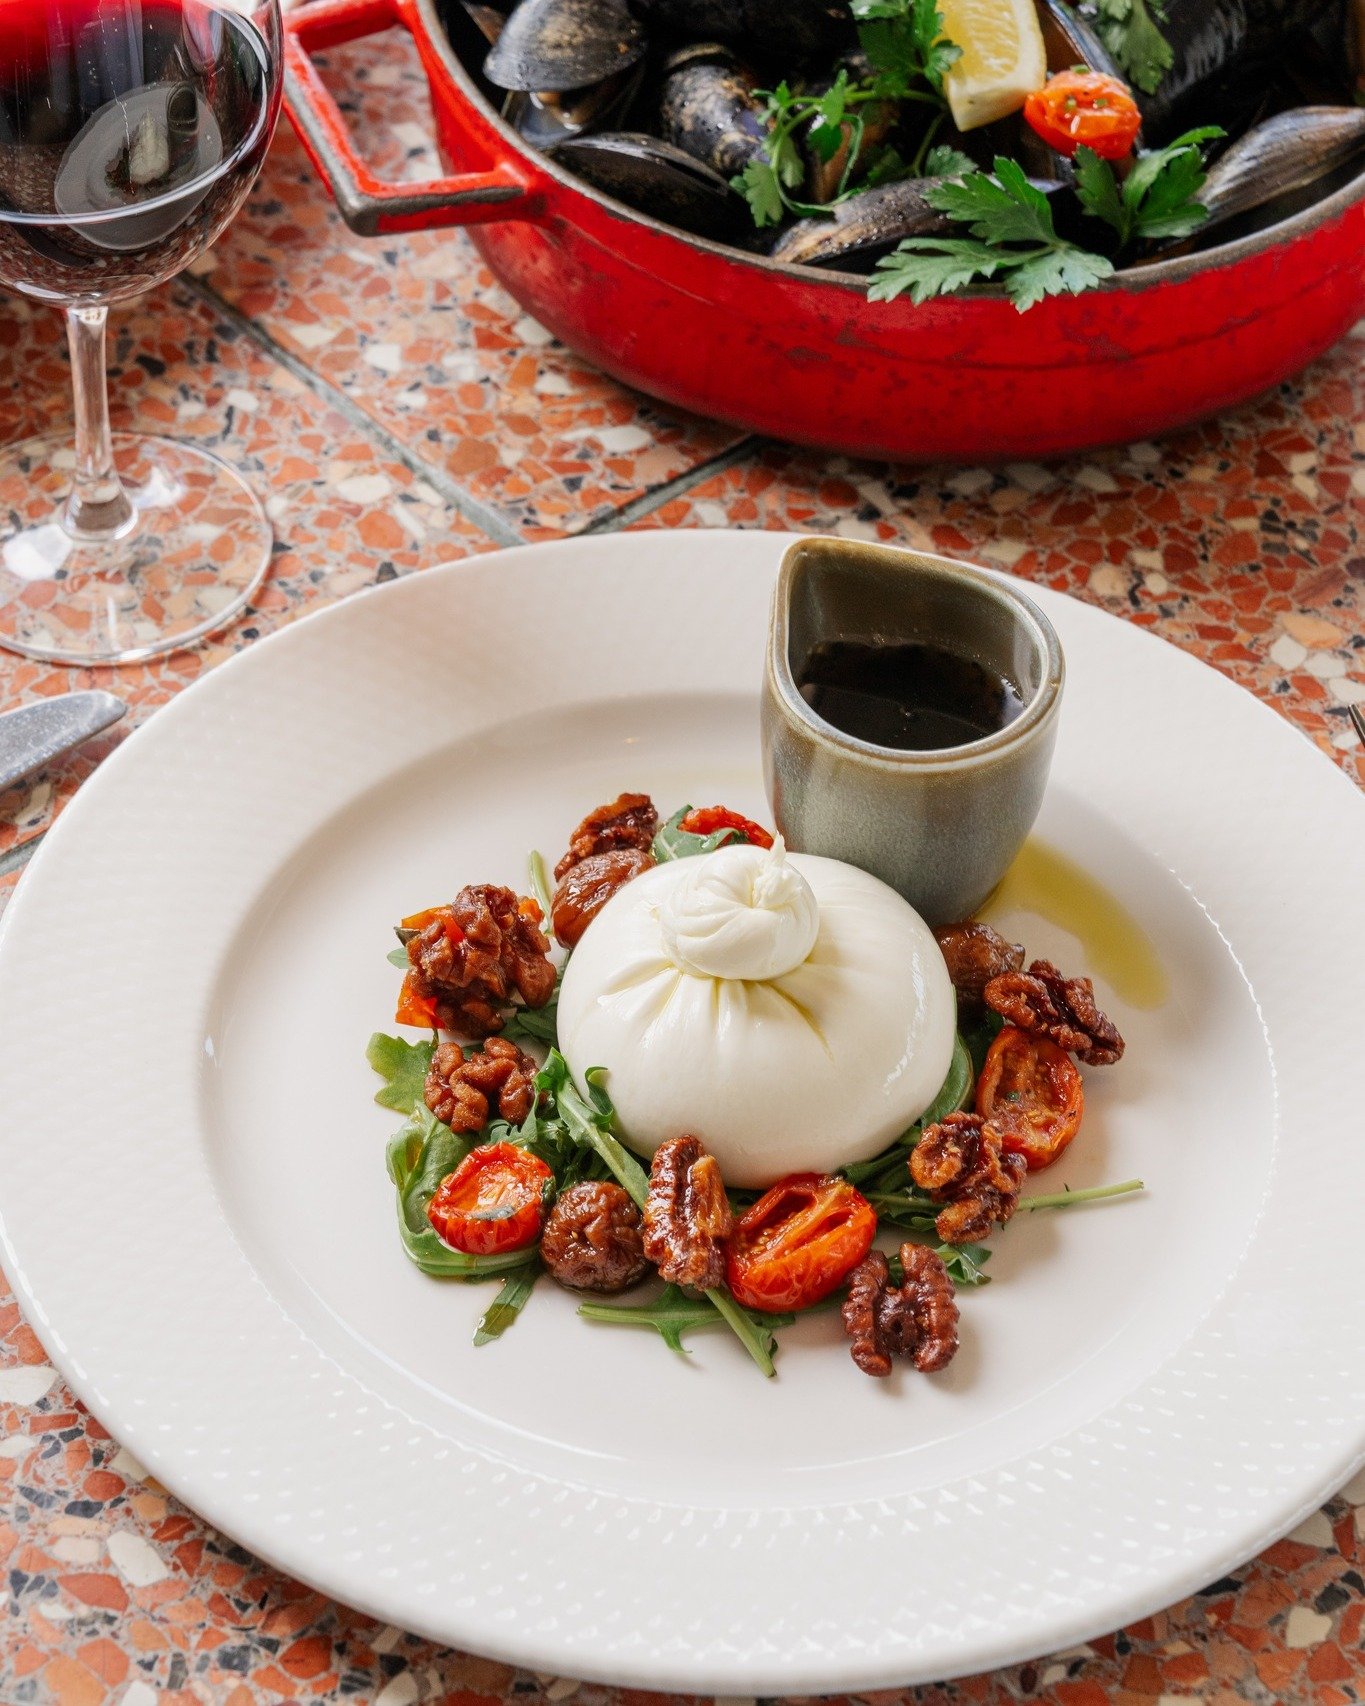 Creamy burrata, crunchy walnuts, and a drizzle of truffle honey&mdash;need we say more?

www.massimorestaurant.com.au/bookings for reservations or call us on (07) 3221 1663
123 Eagle St, Brisbane City QLD 4000

#Italian #MassimoRestaurant #thisisbris